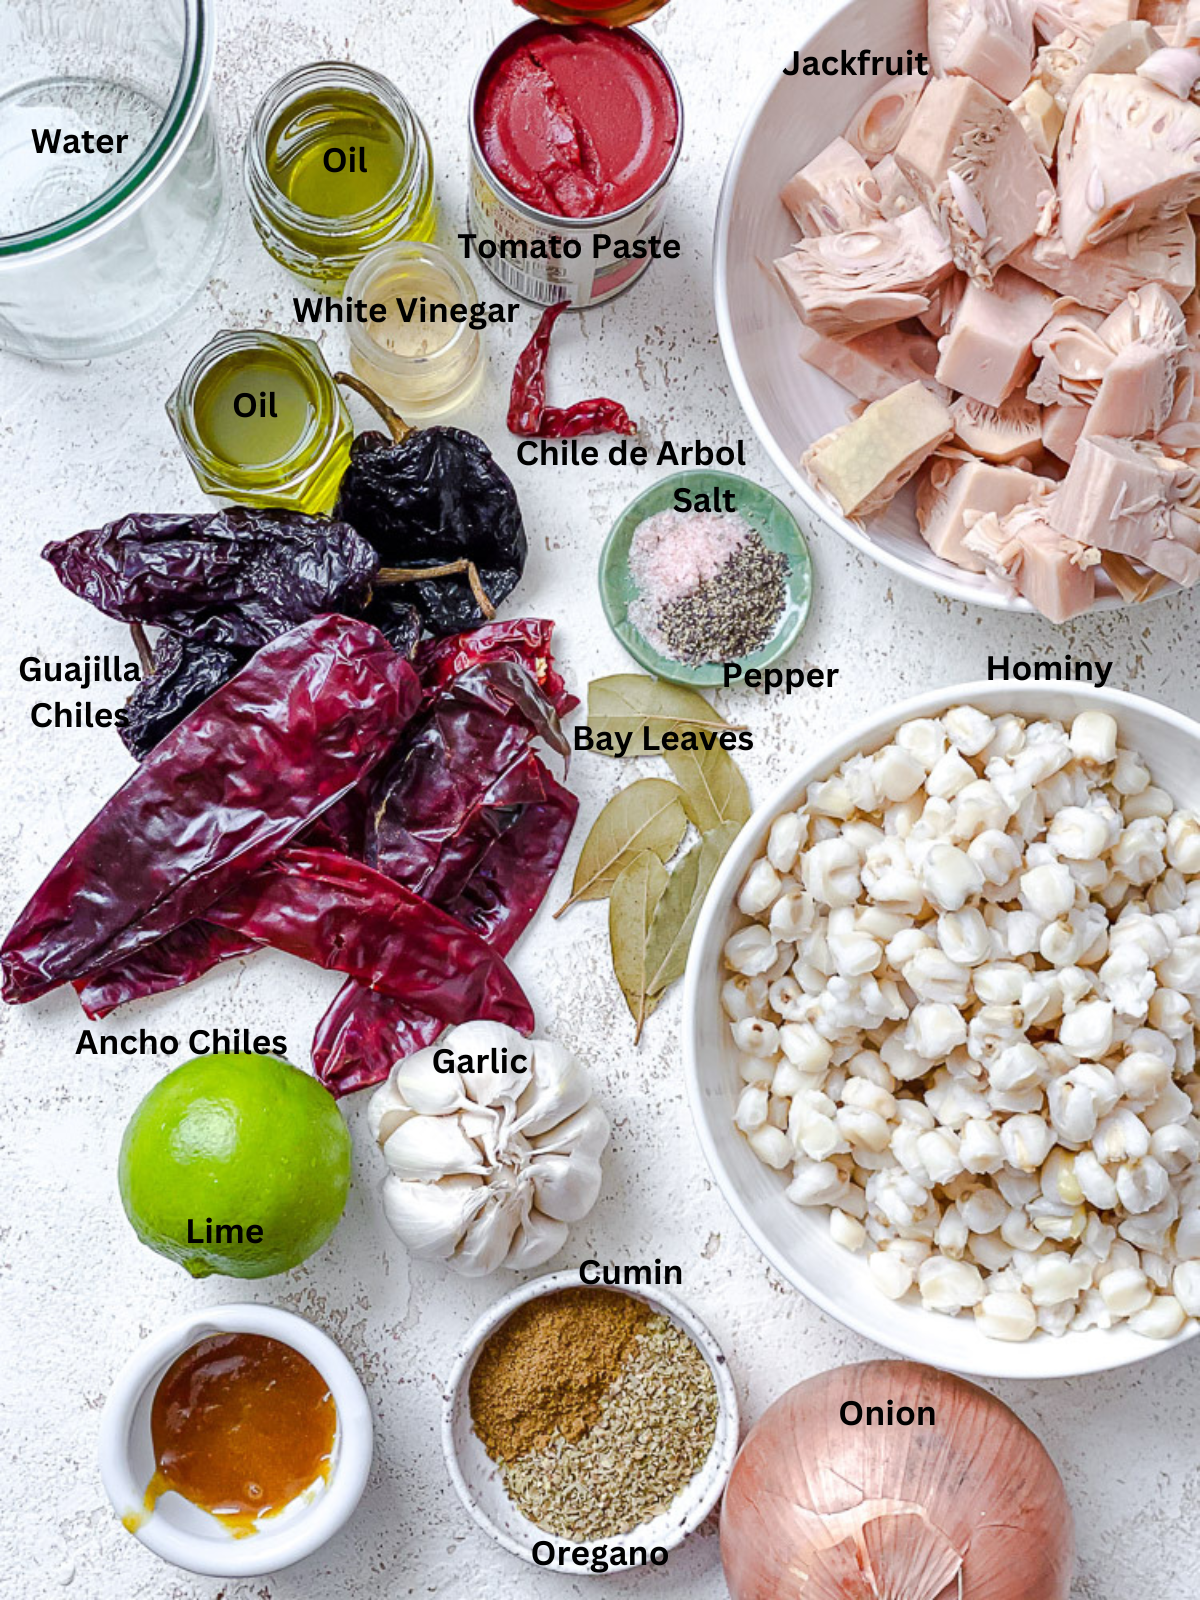 ingredients for Vegan Posole Rojo [Mexican Hominy Soup] measured out on a white surface